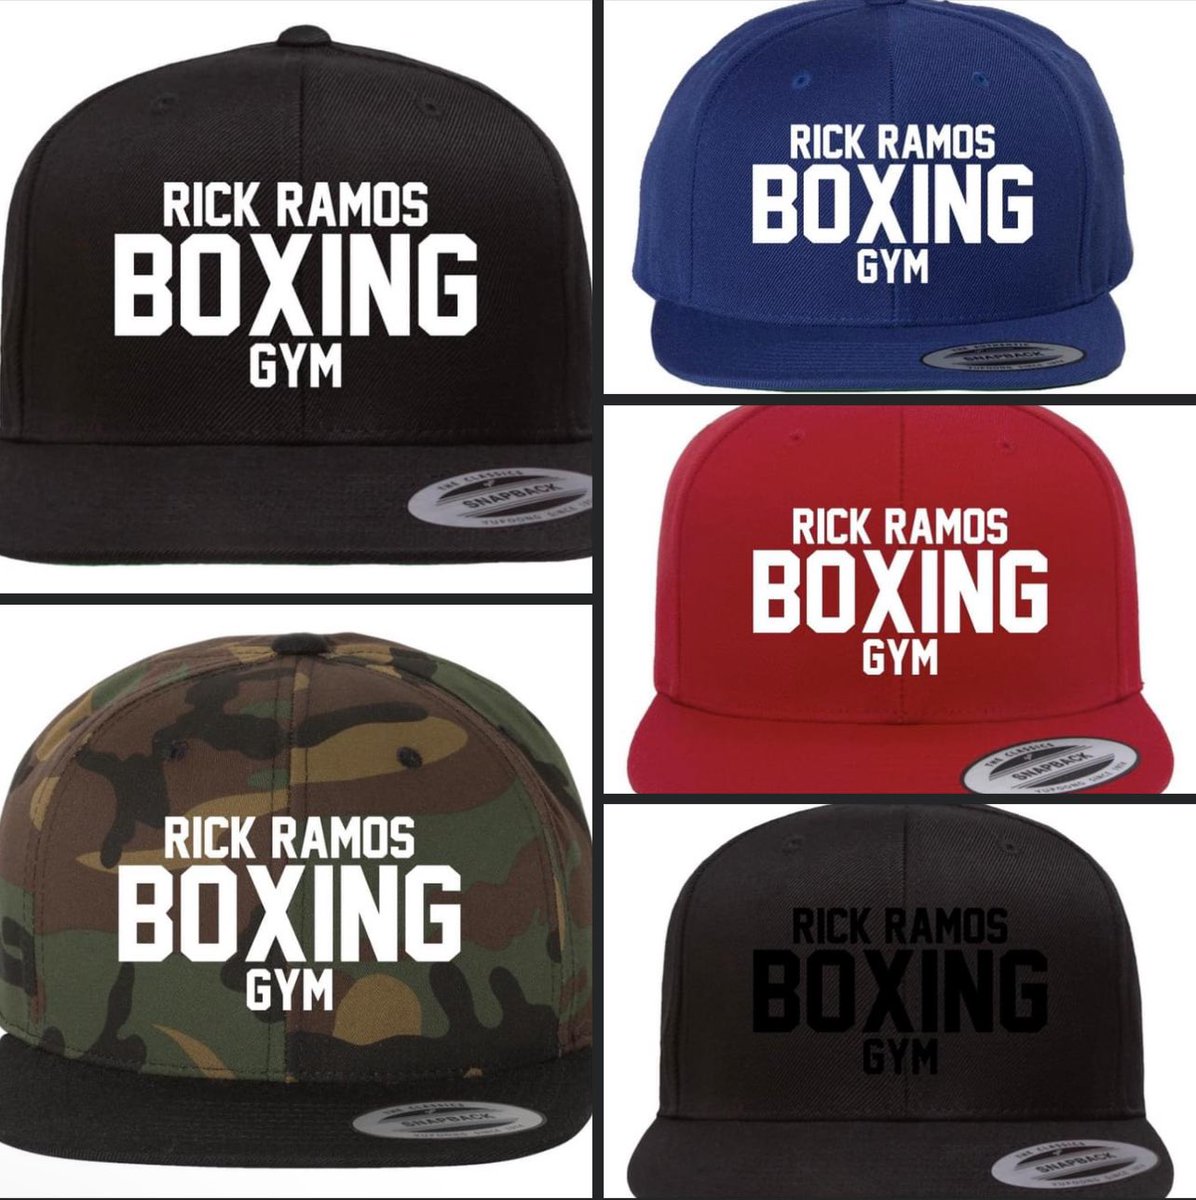 ‼️ NEW MERCH DROP - RRB SNAP BACK‼️ The Rick Ramos Boxing Gym SNAP BACKS are back and available for direct shipping! #RickRamosBoxing Also available: “Lets Make Chicago Boxing Great Again” snap back! 👀 Click here to buy your now: shoponep.printavo.com/merch/rick-ram…